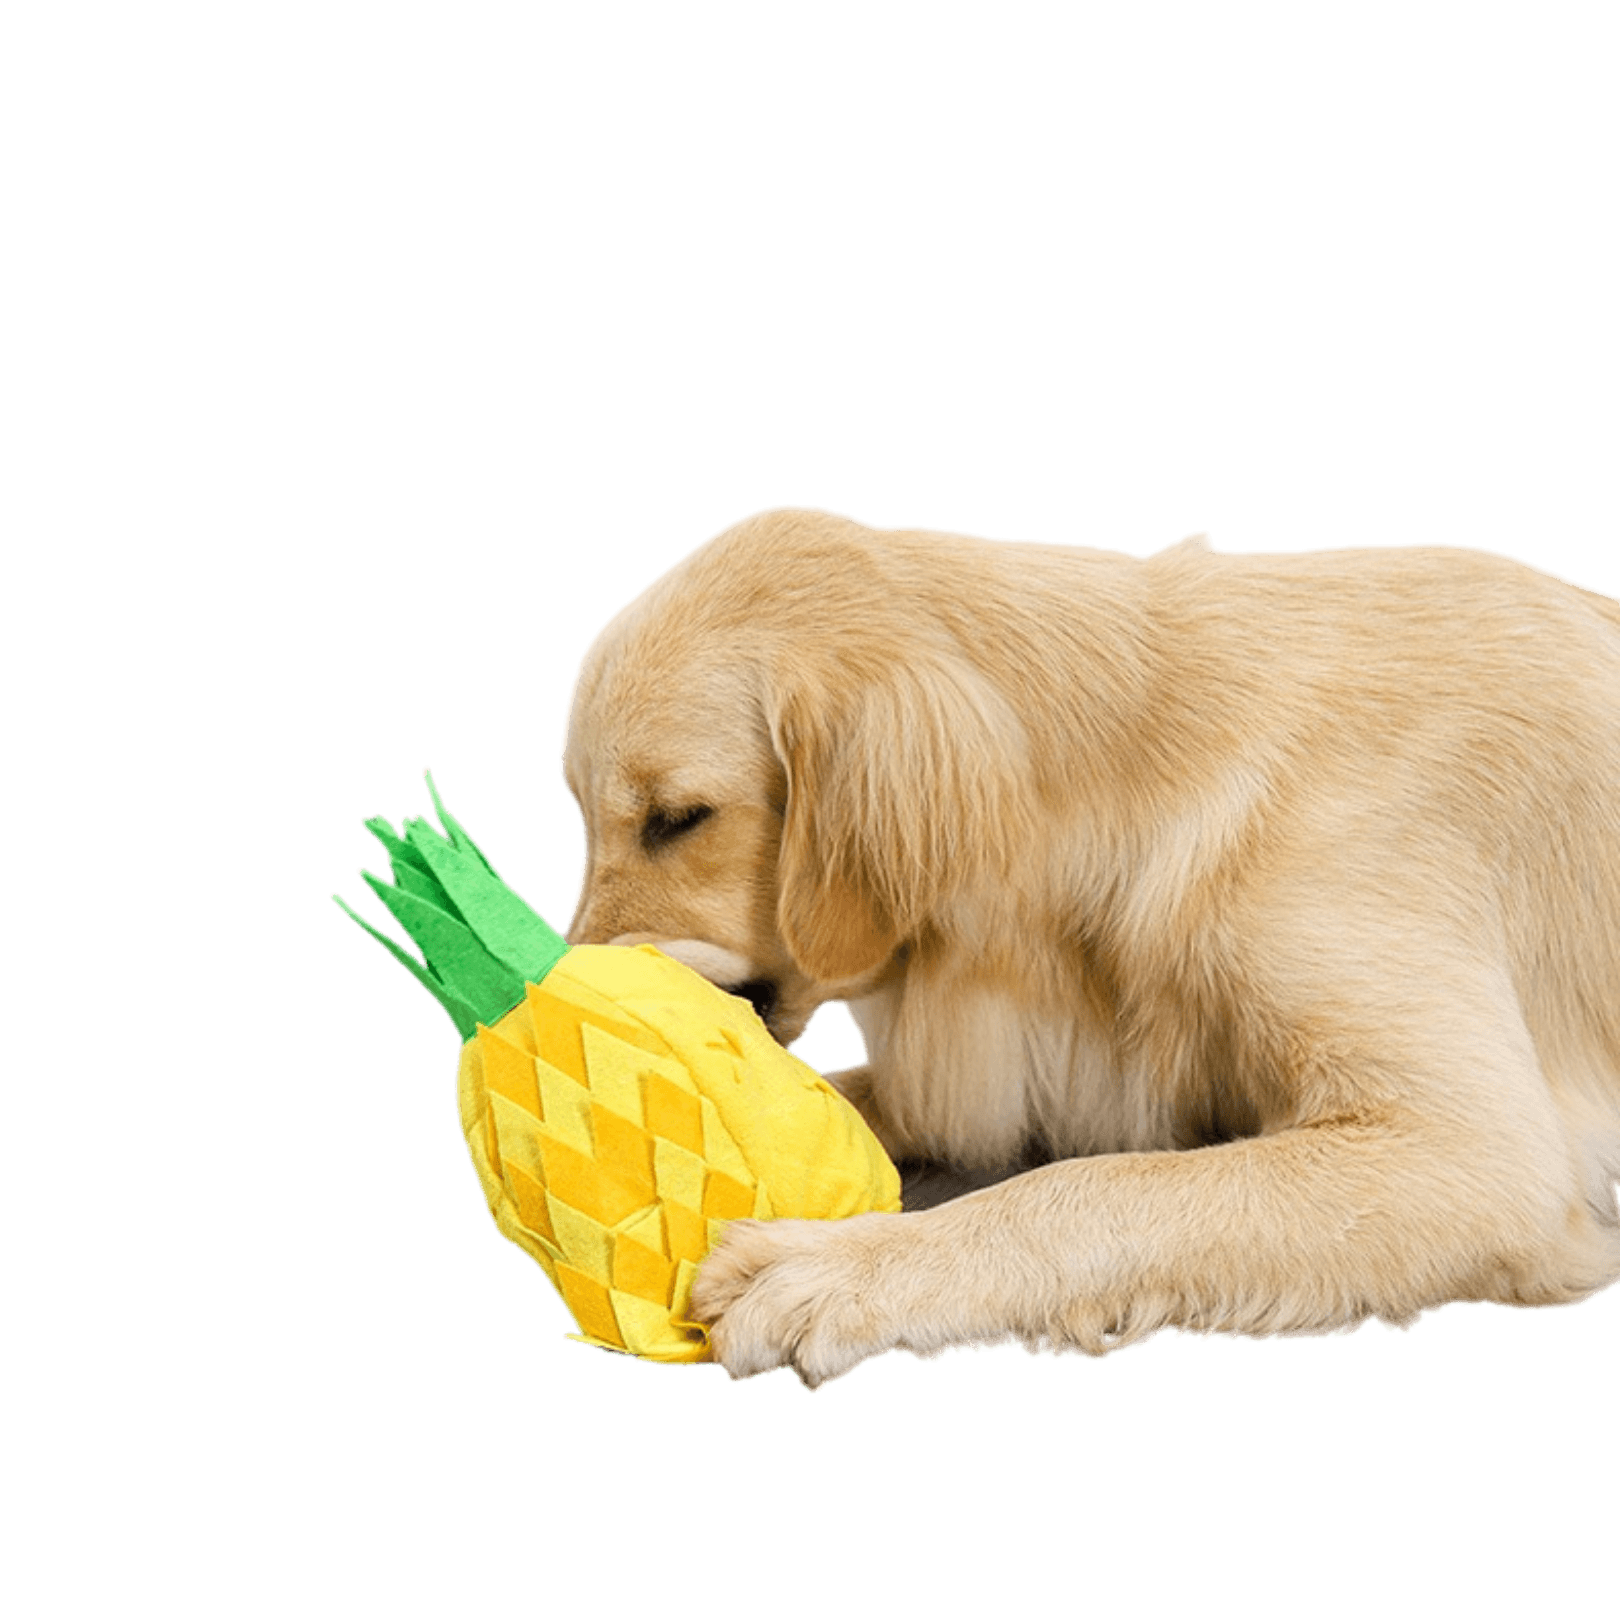 "Mr. Pineapple" Snuffle Toy ｜ PupUp